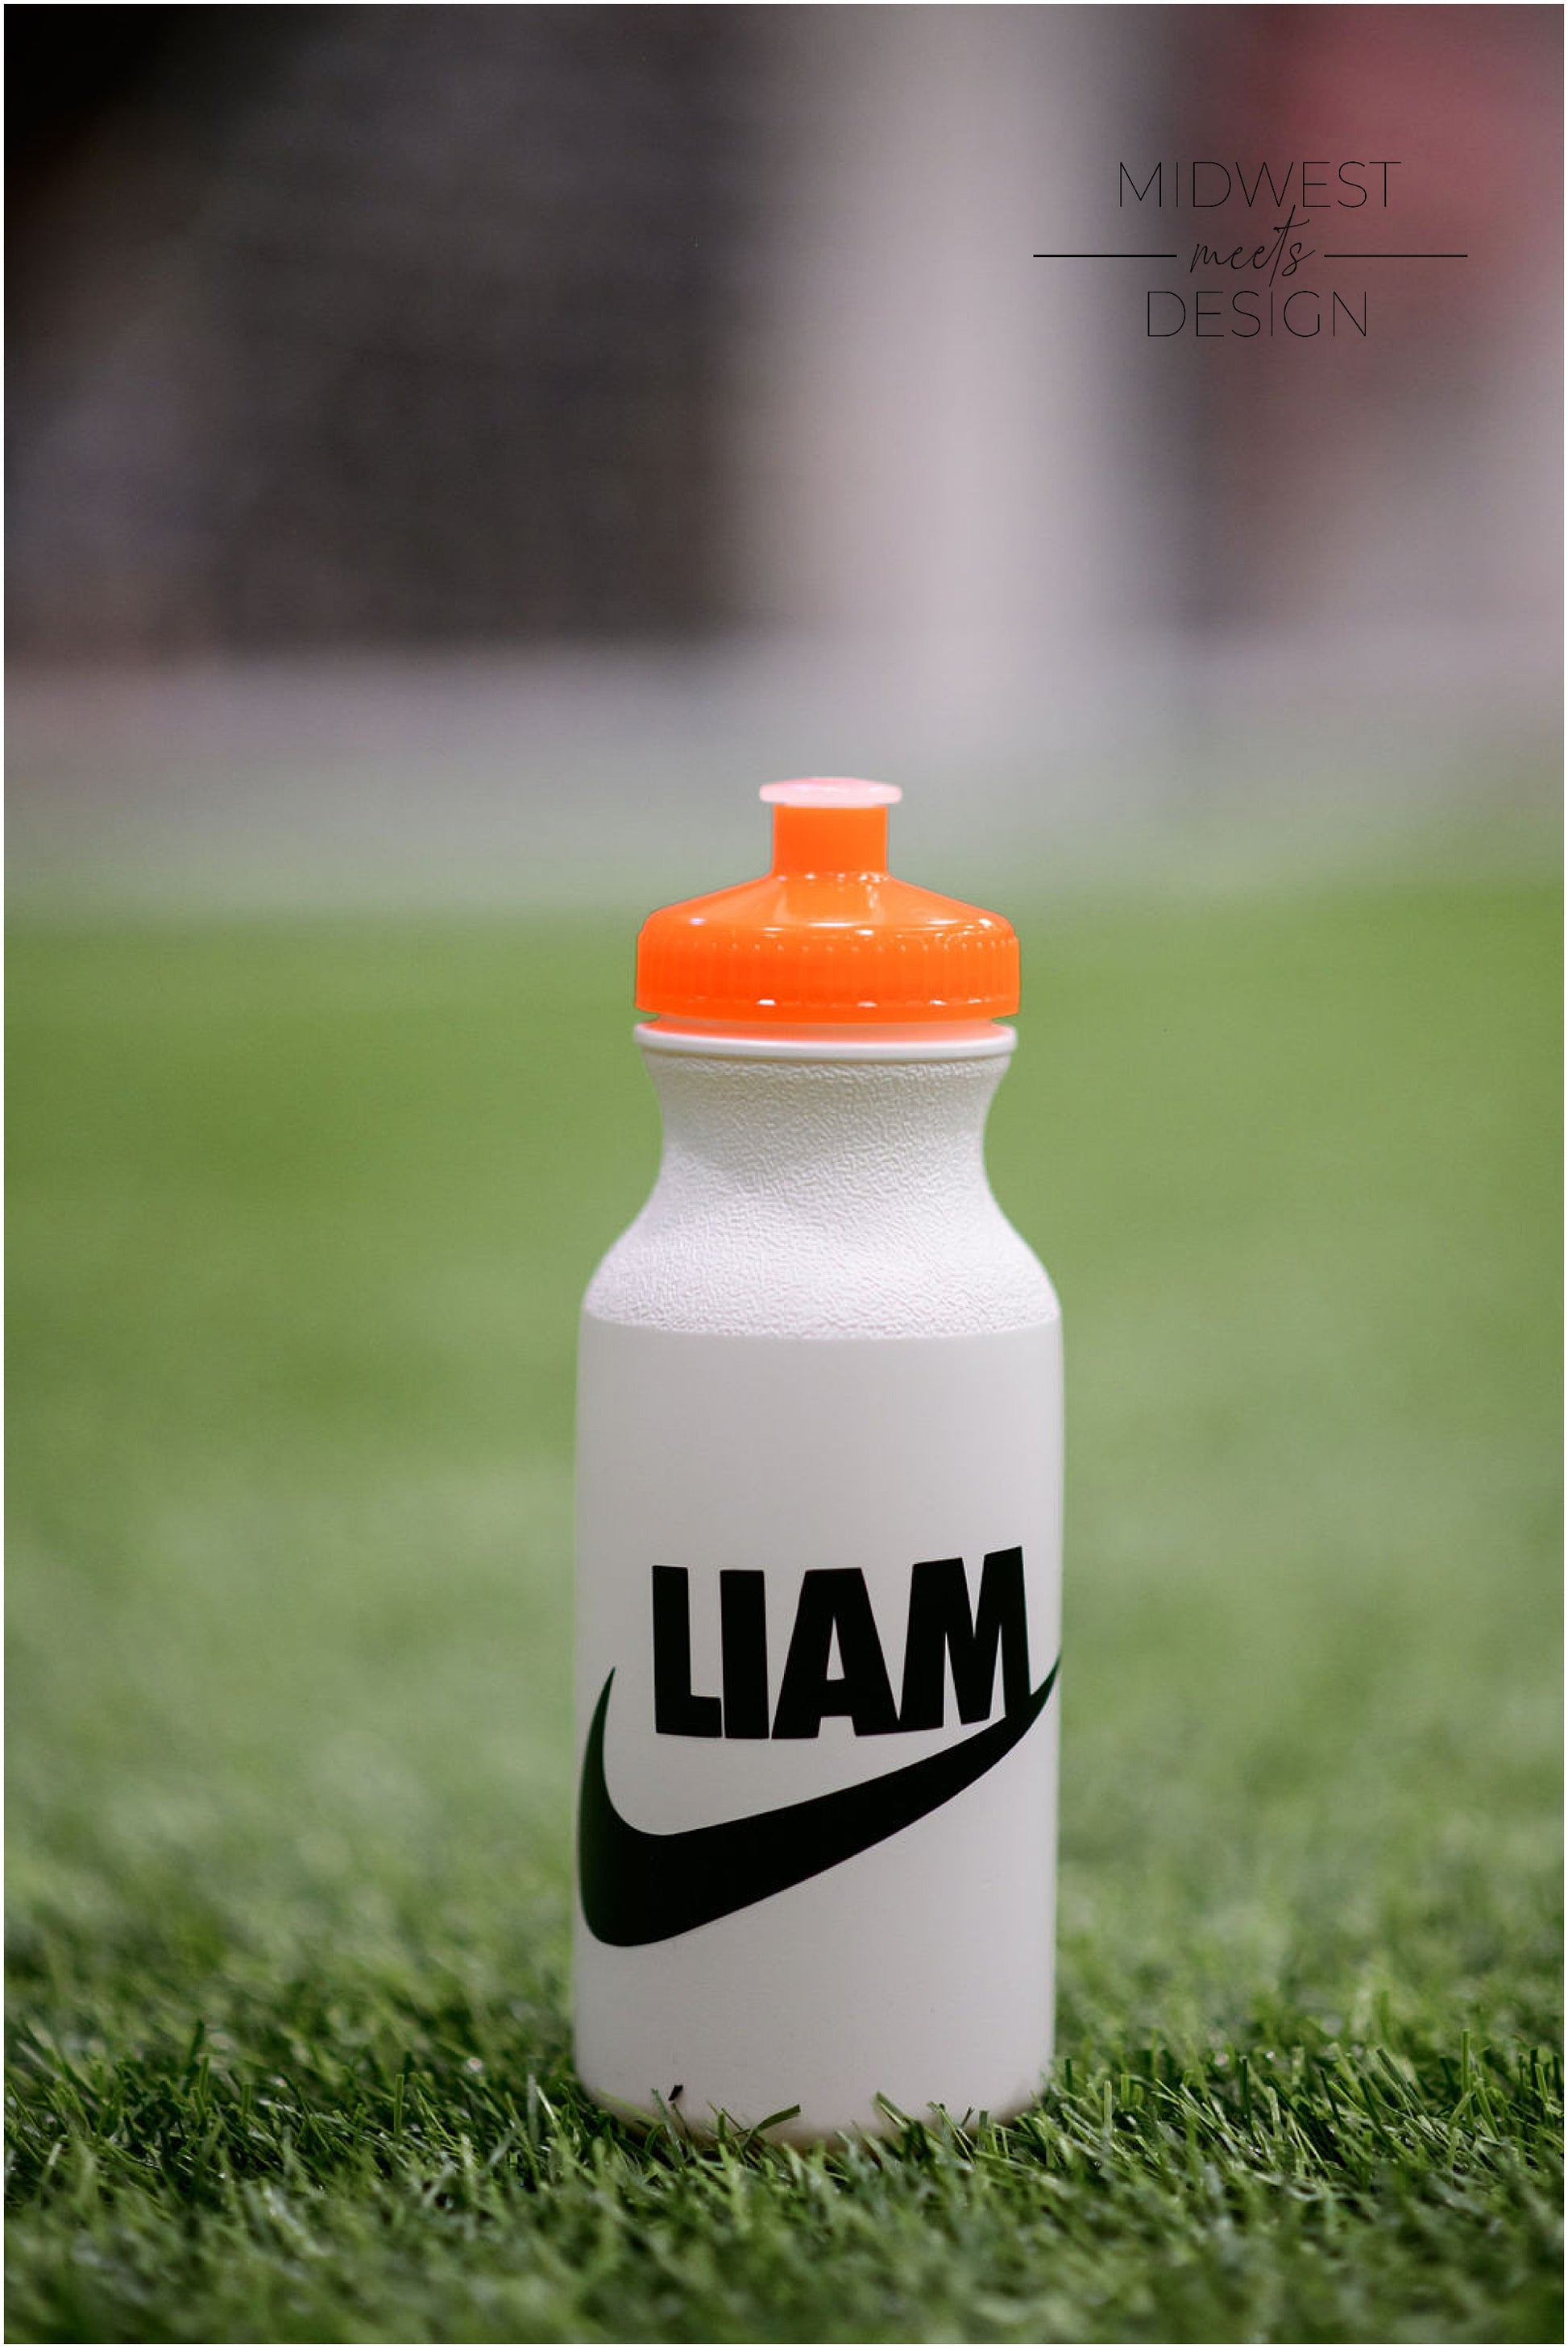 Nike Inspired Water Bottle Favors – Midwest Meets Design